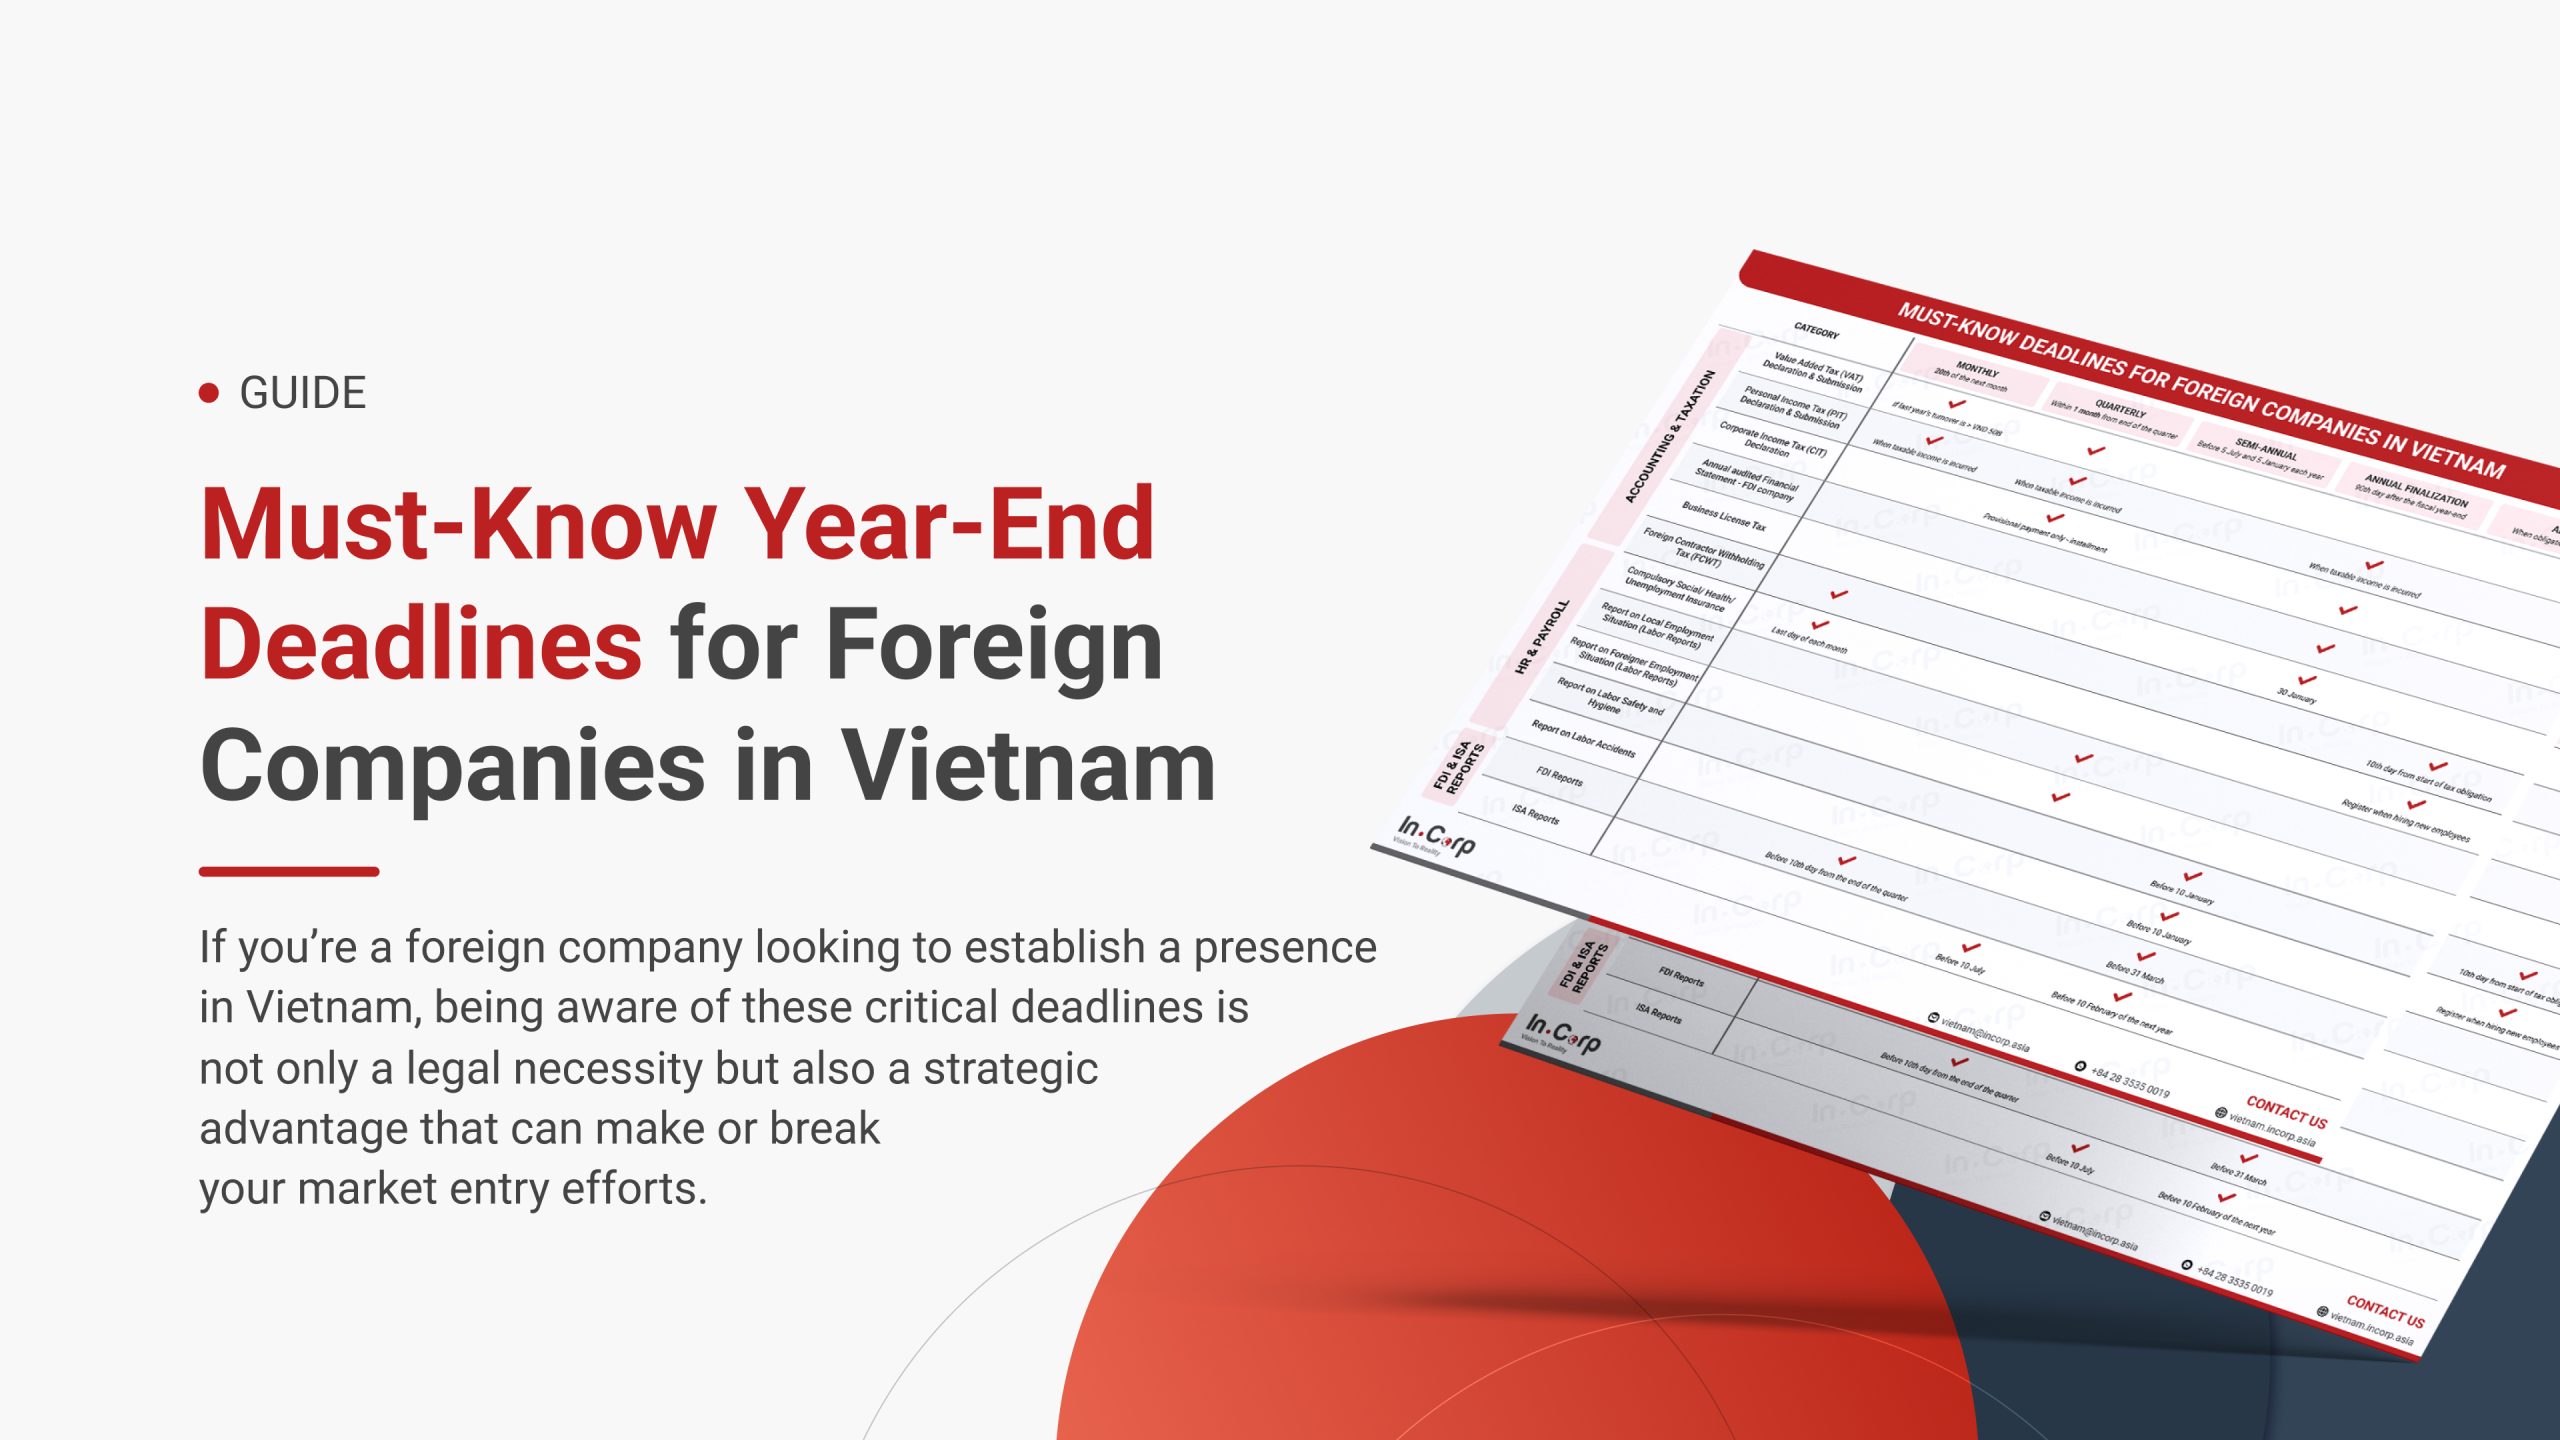 Must-Know Year-End Deadlines for Foreign Companies in Vietnam